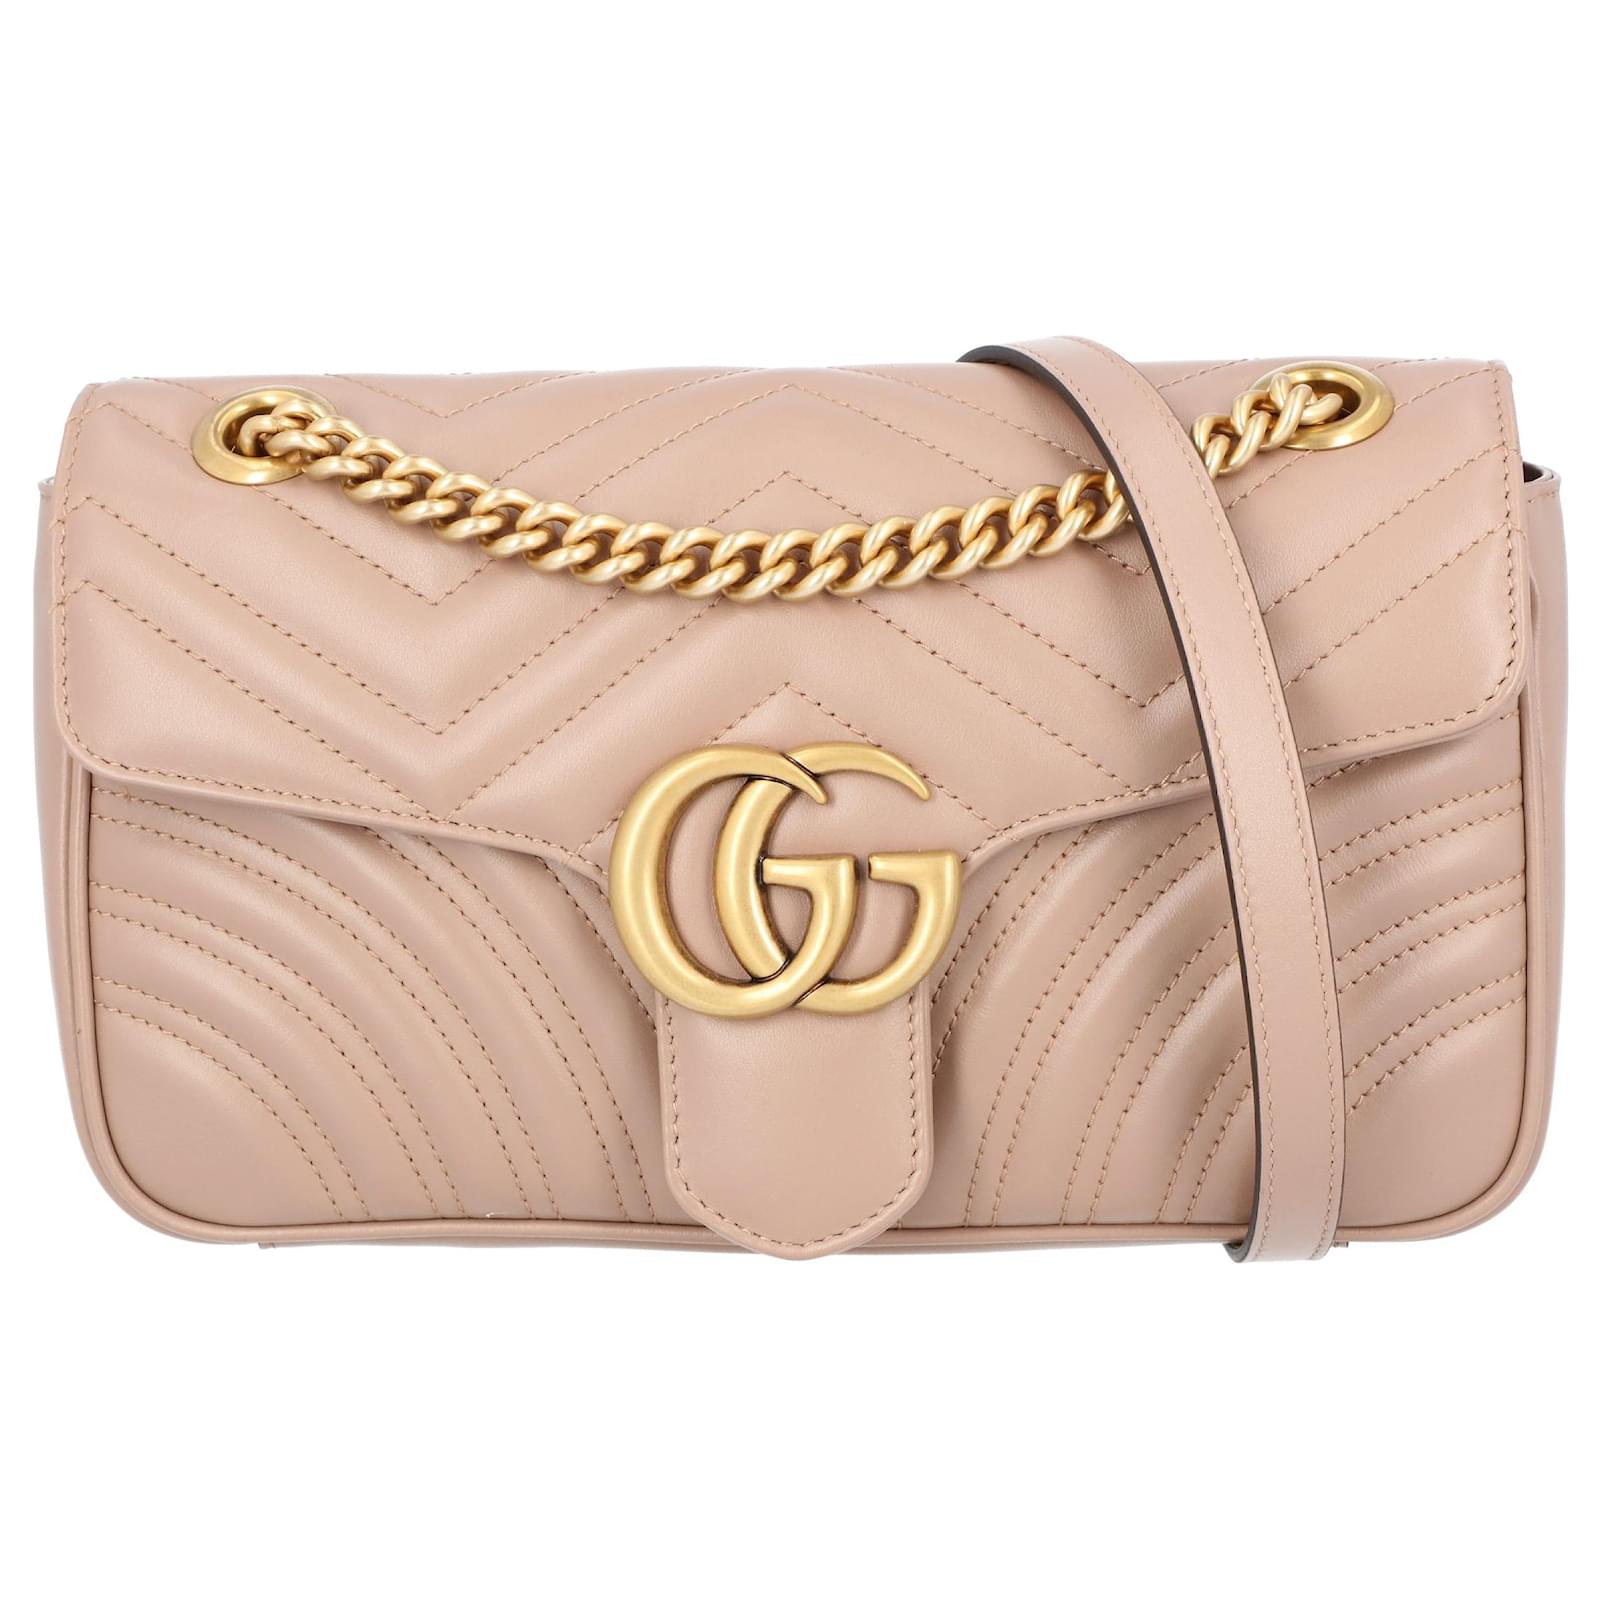 Gucci GG Marmont Small Leather Shoulder Bag Pink